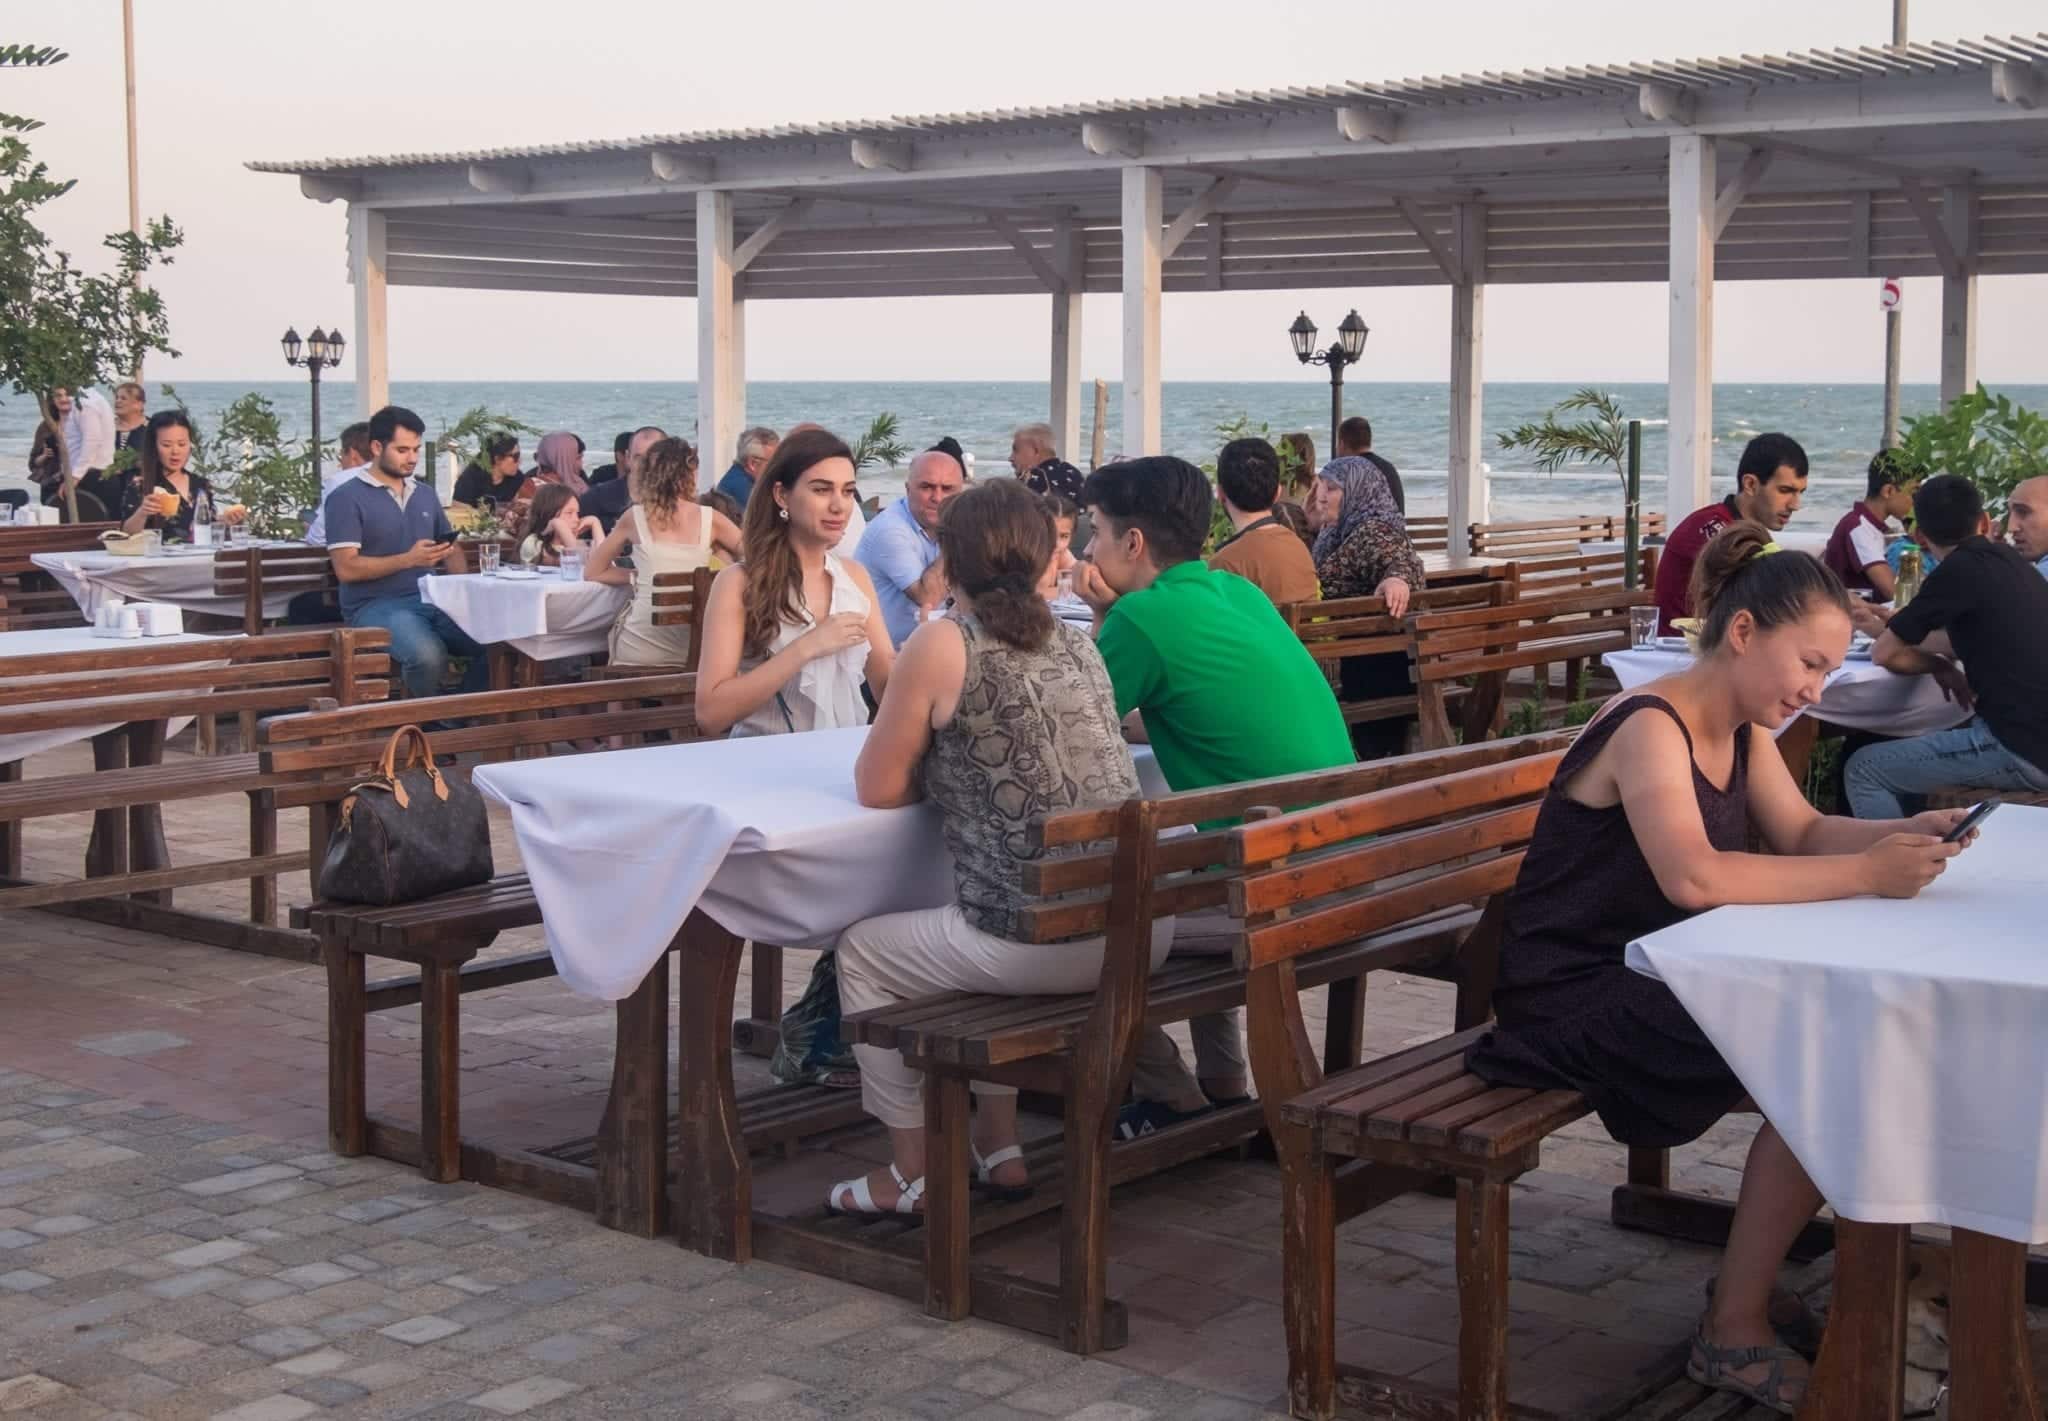 People sitting at outdoor tables at a restaurant on the Caspian Sea.